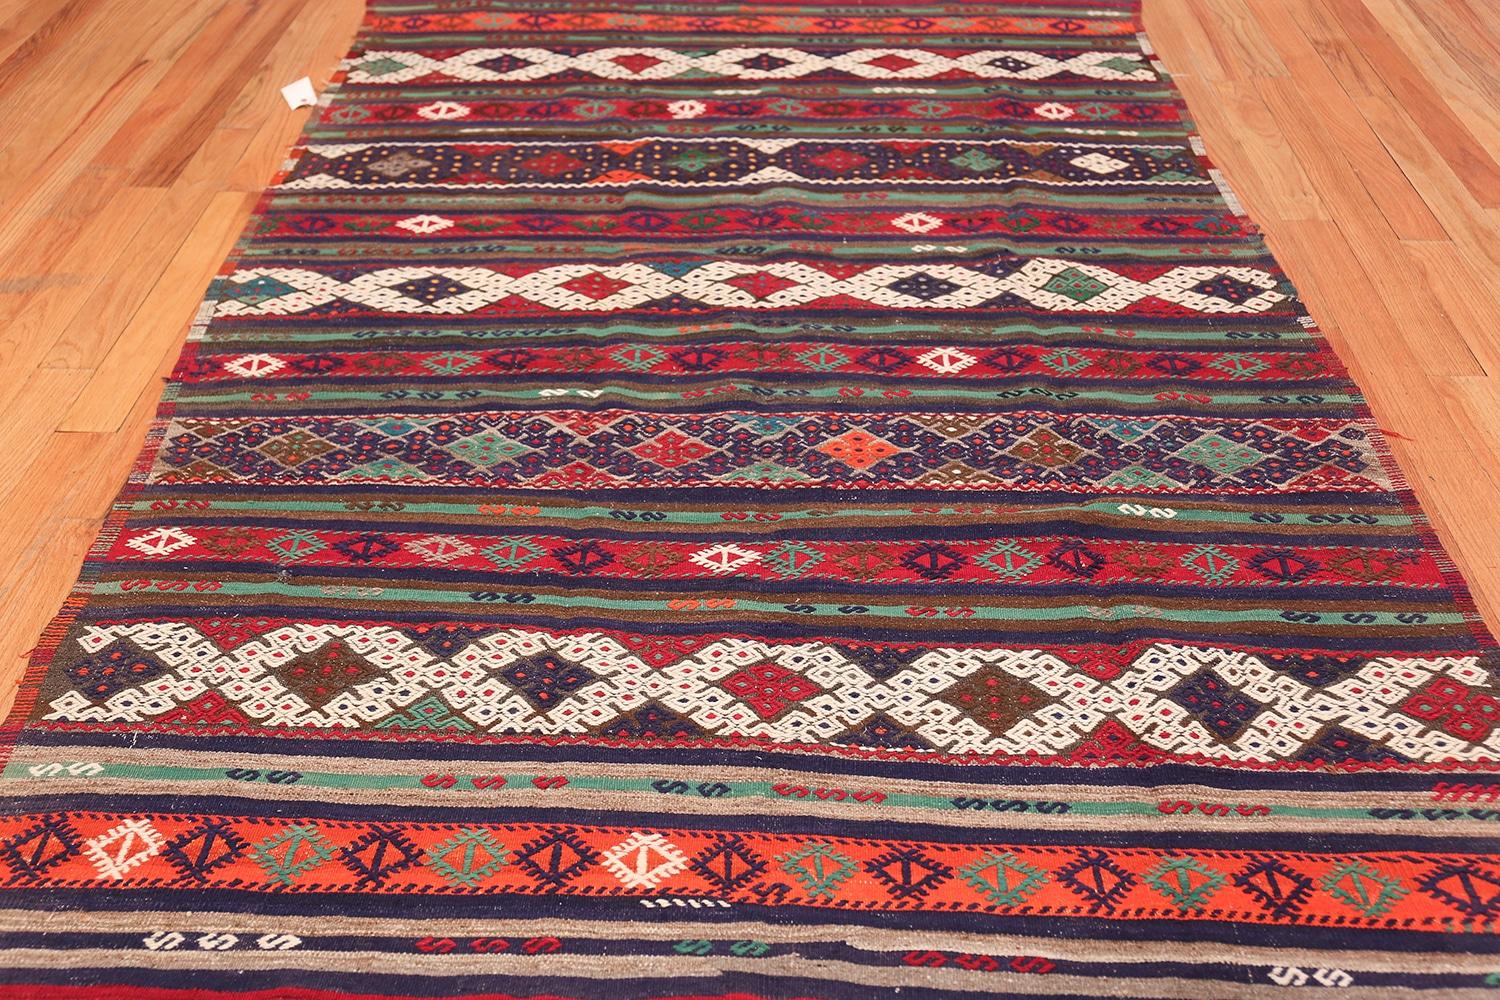 Hand-Woven Vintage Tribal Turkish Kilim. Size: 5 ft 3 in x 9 ft 2 in